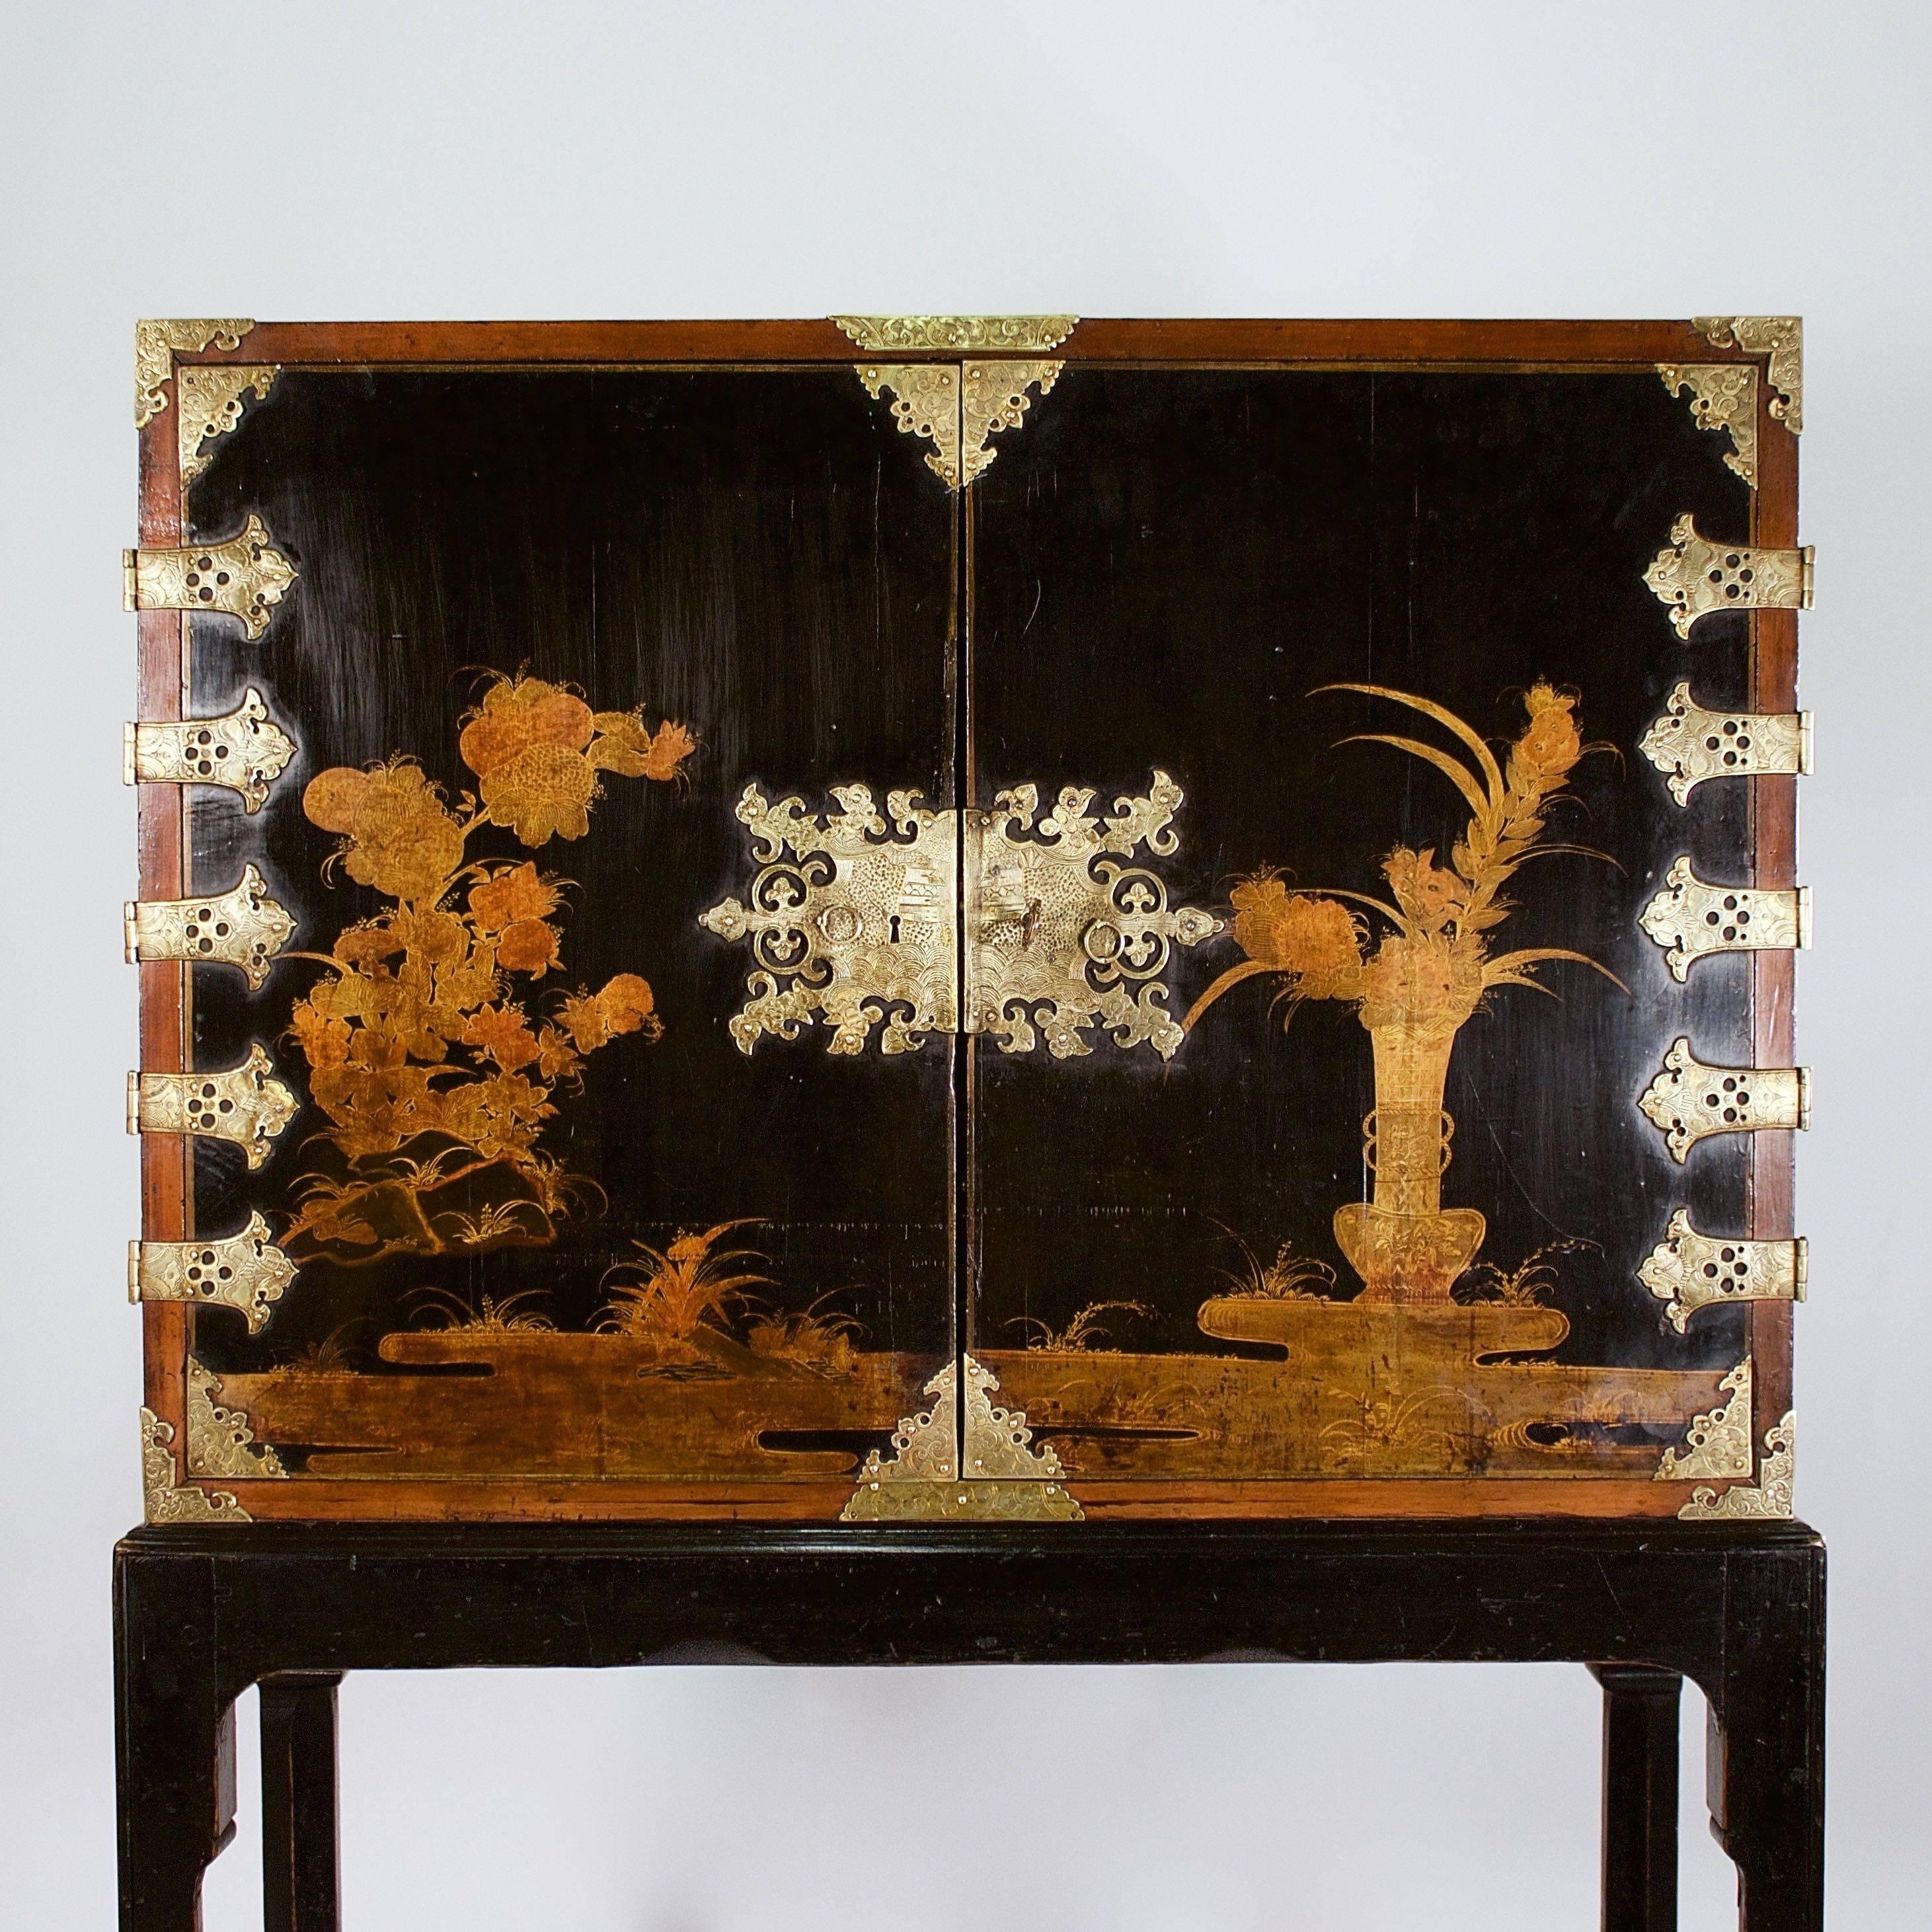 The two doors with floral lacquer decoration on a black lacquer ground with fine chased brass hinges and escutcheons enclosing a series of ten drawers of various sizes each decorated with village scenes and each drawer divided by nashiji lacquer